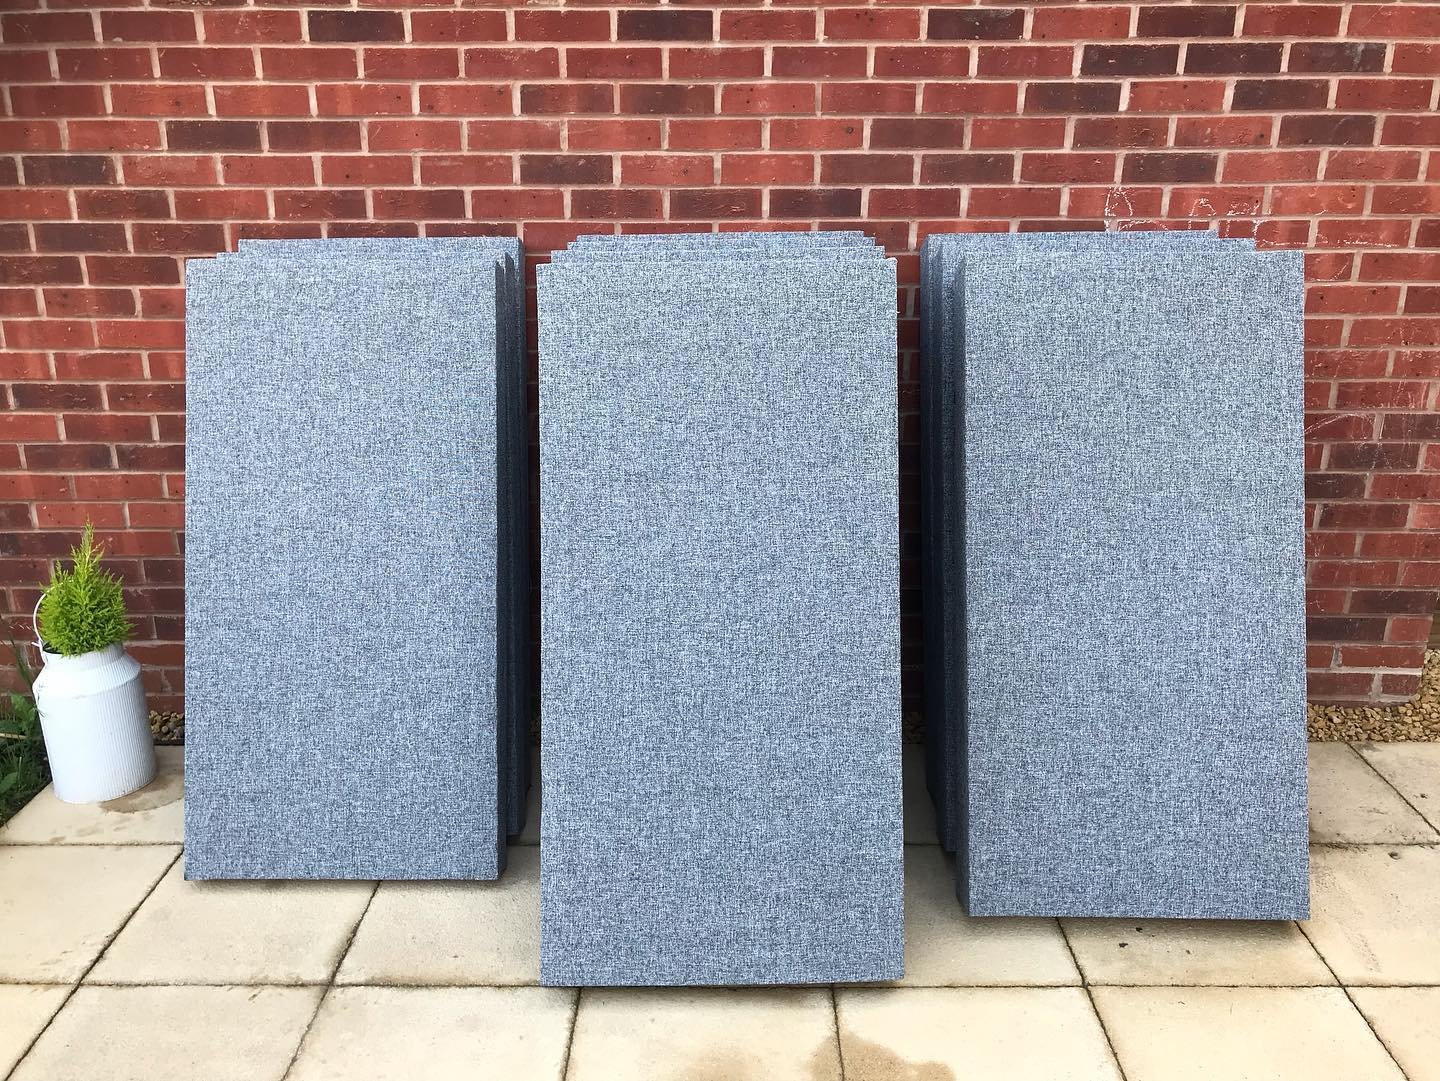 **SOLD OUT**
10x Sound Absorber Panels For Room Acoustic Treatment. Handmade with high-quality acoustically transparent Camira fabric.

10x in total
&pound;50 GBP each
&pound;425 GBP for the lot

Selling as not needed in new studio.
Collection from W